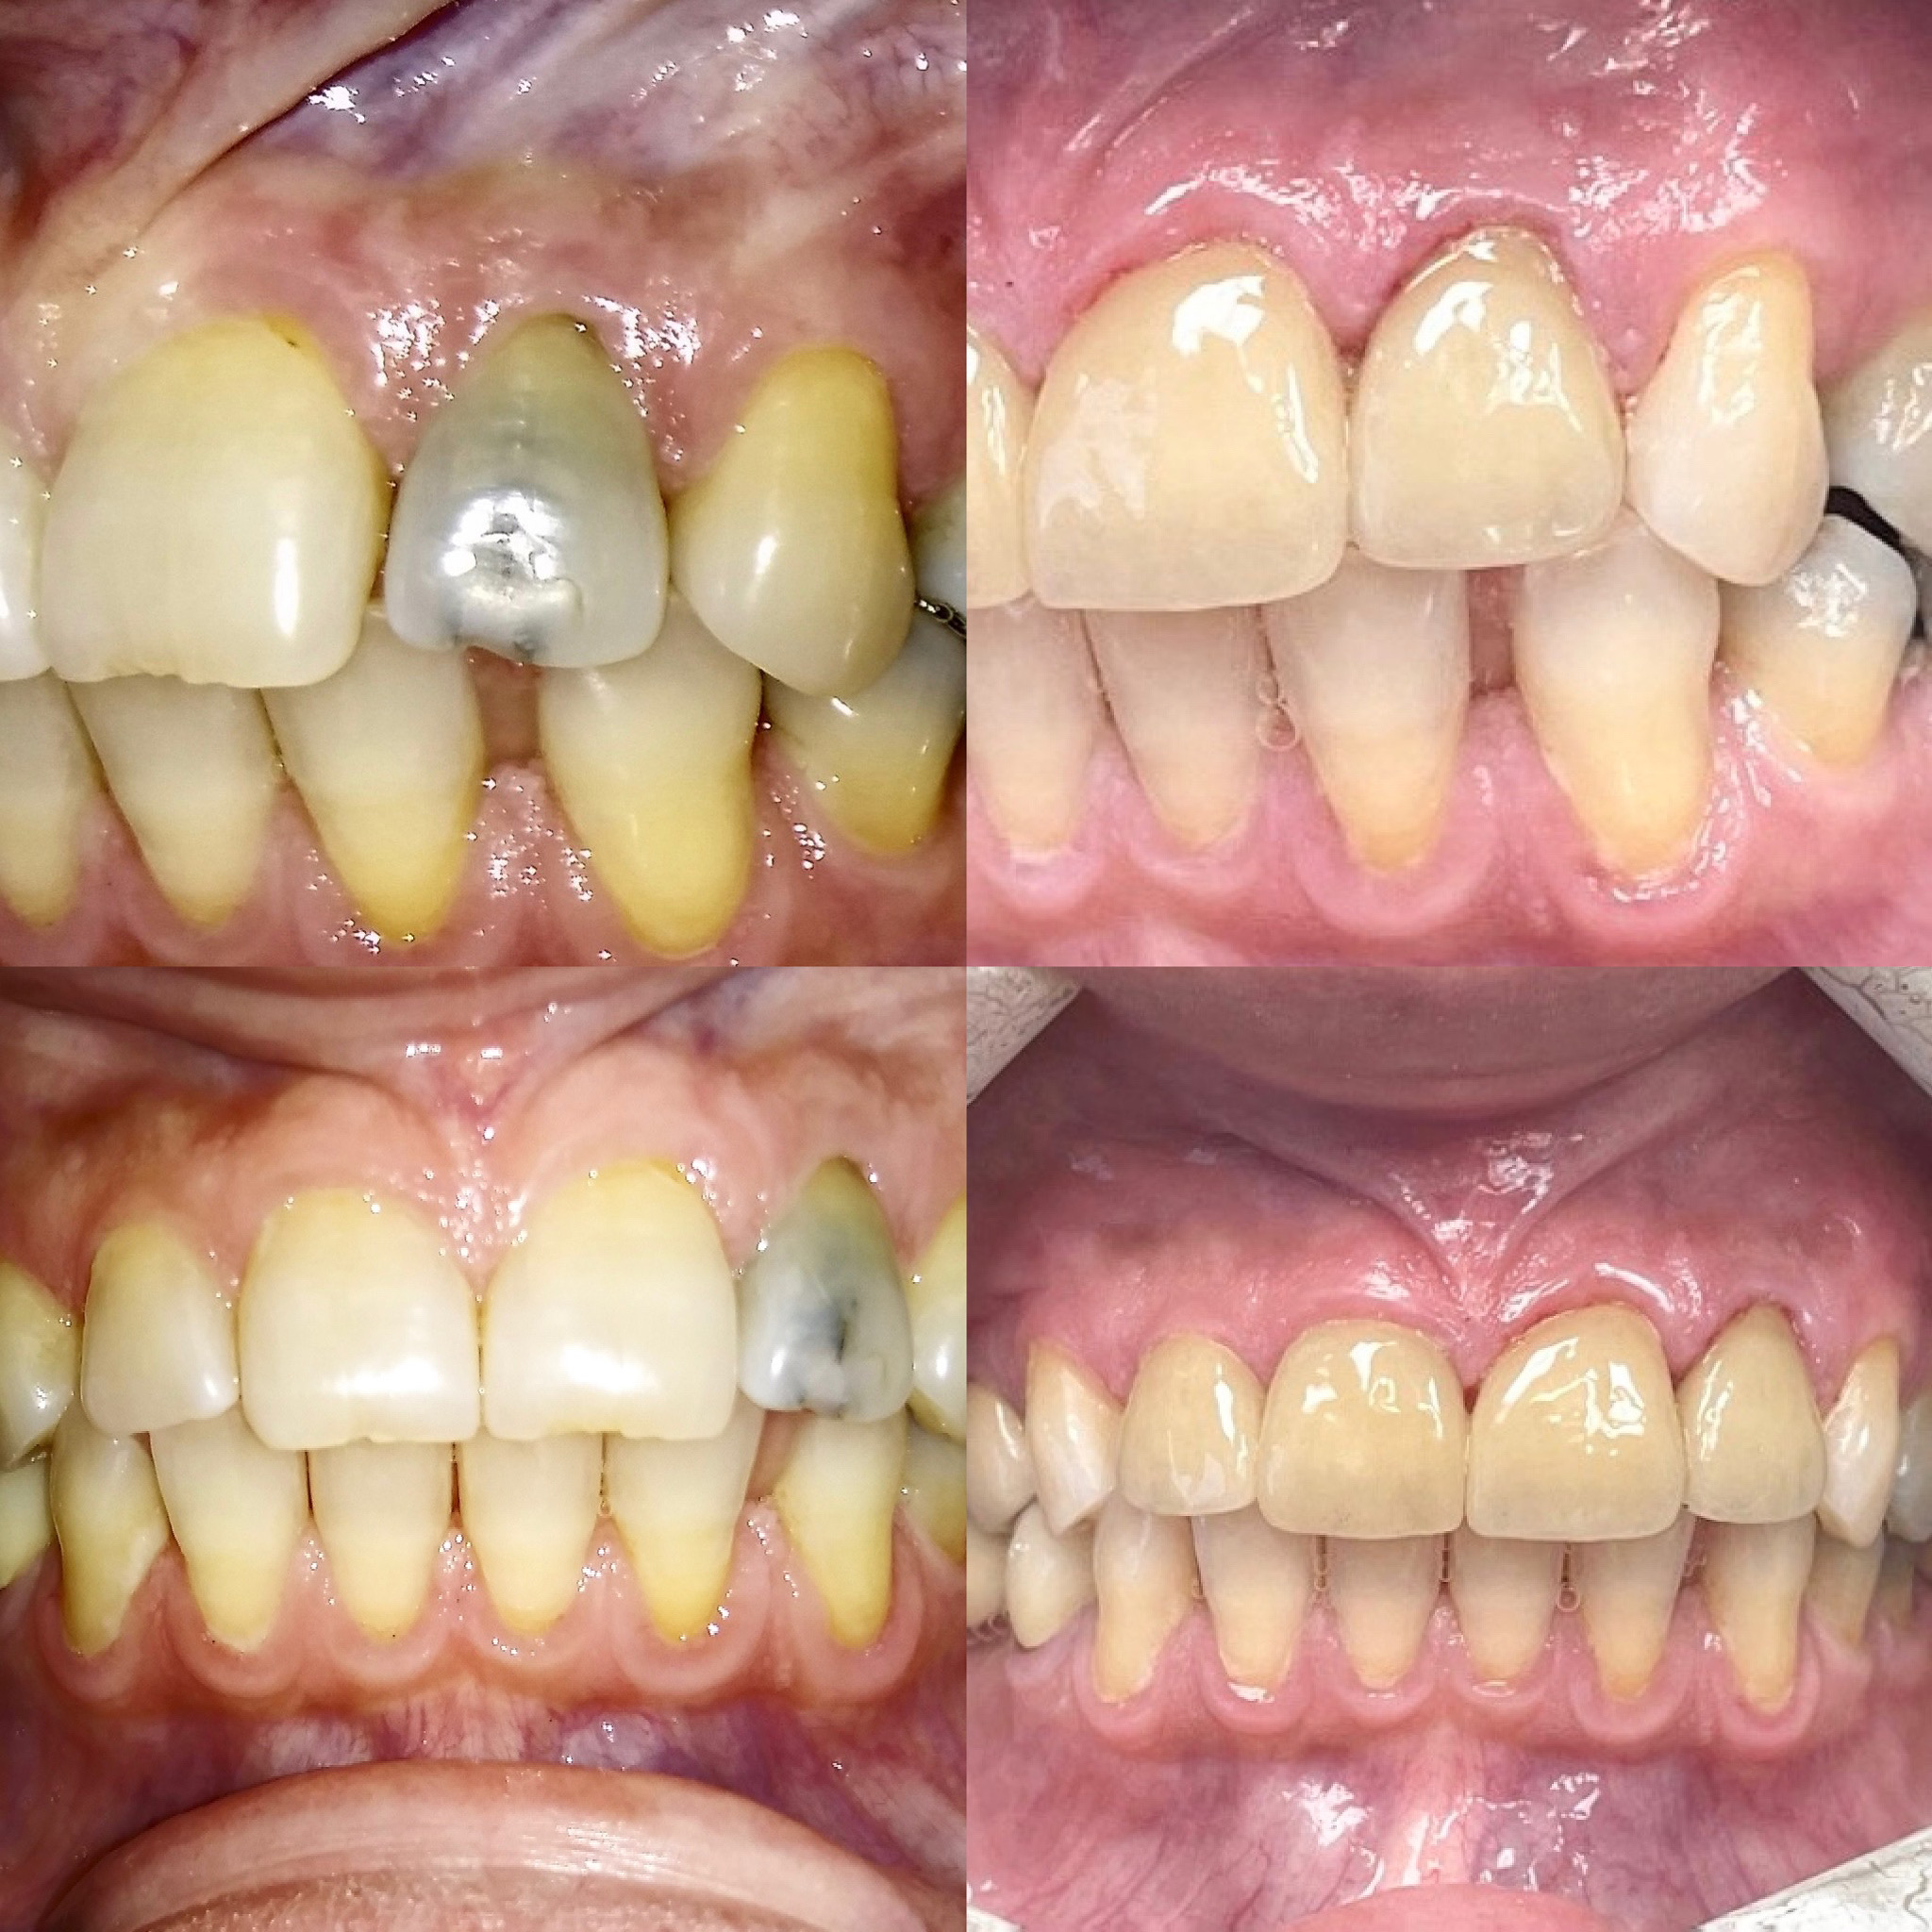 Give Dental Crowns - Before and After Replace missing teeth